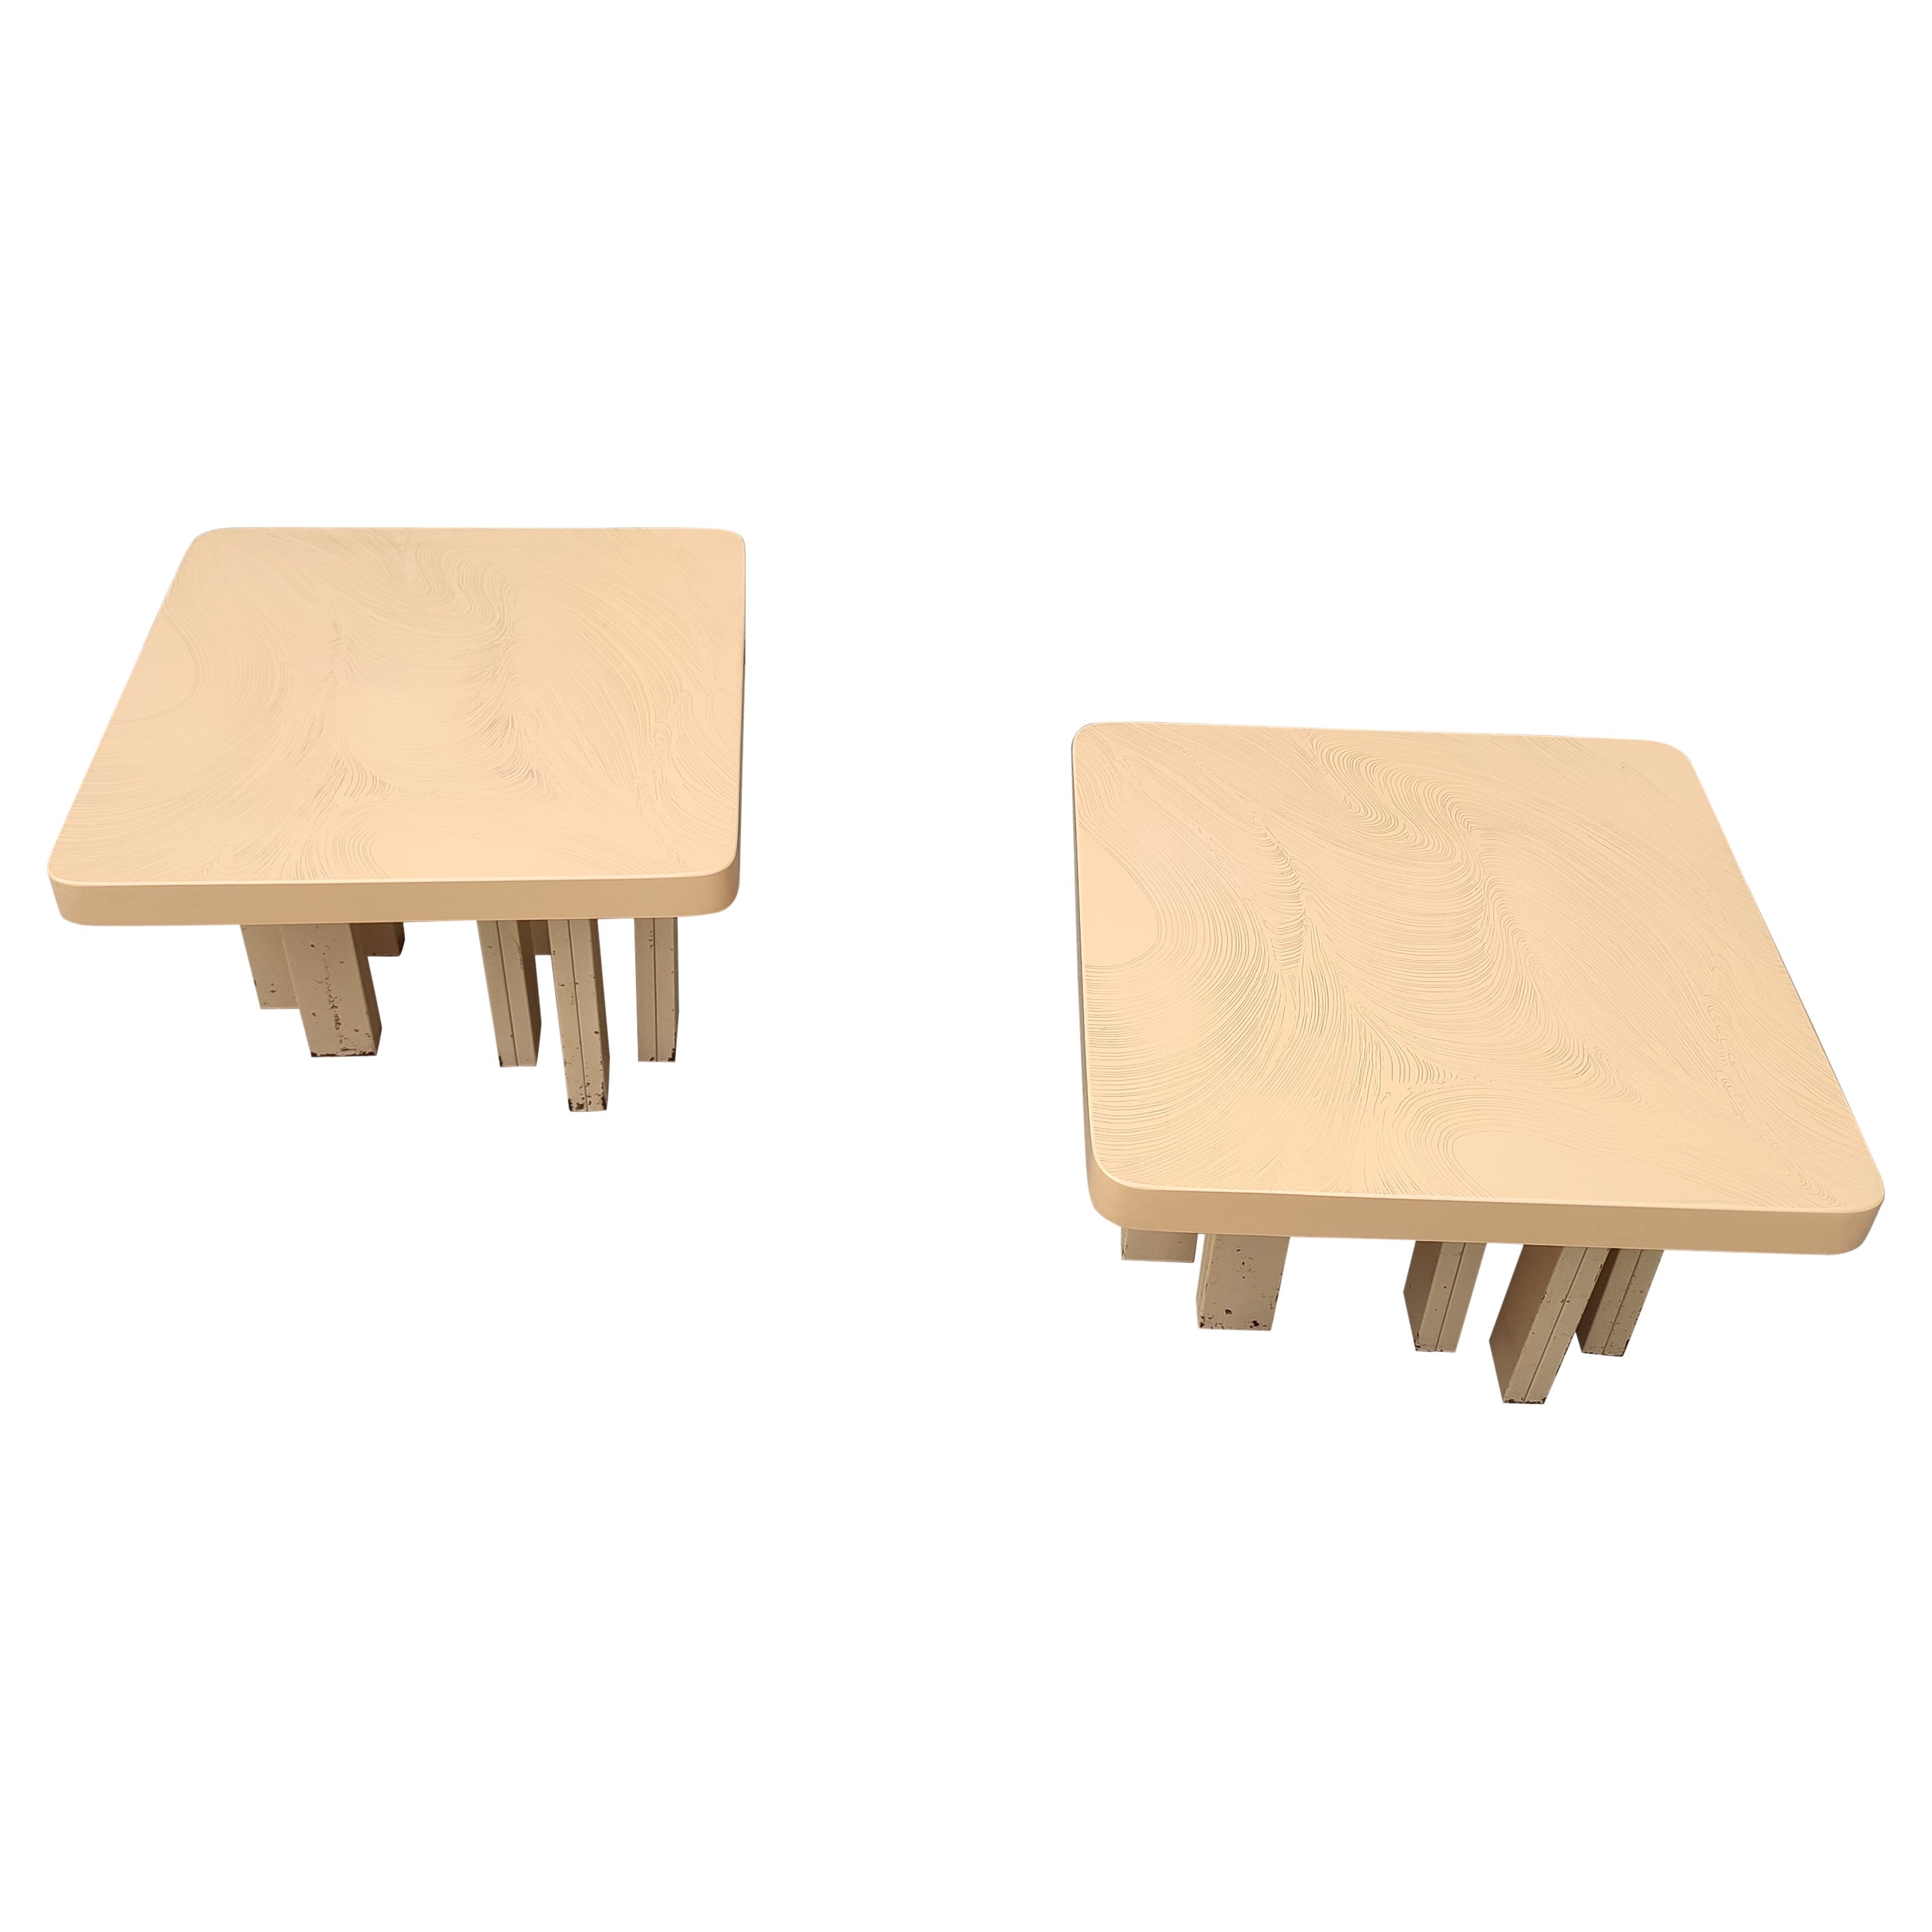 White Cream Resin Pair of Side Tables from Jean Claude Dresse, Belgium, 1970s For Sale